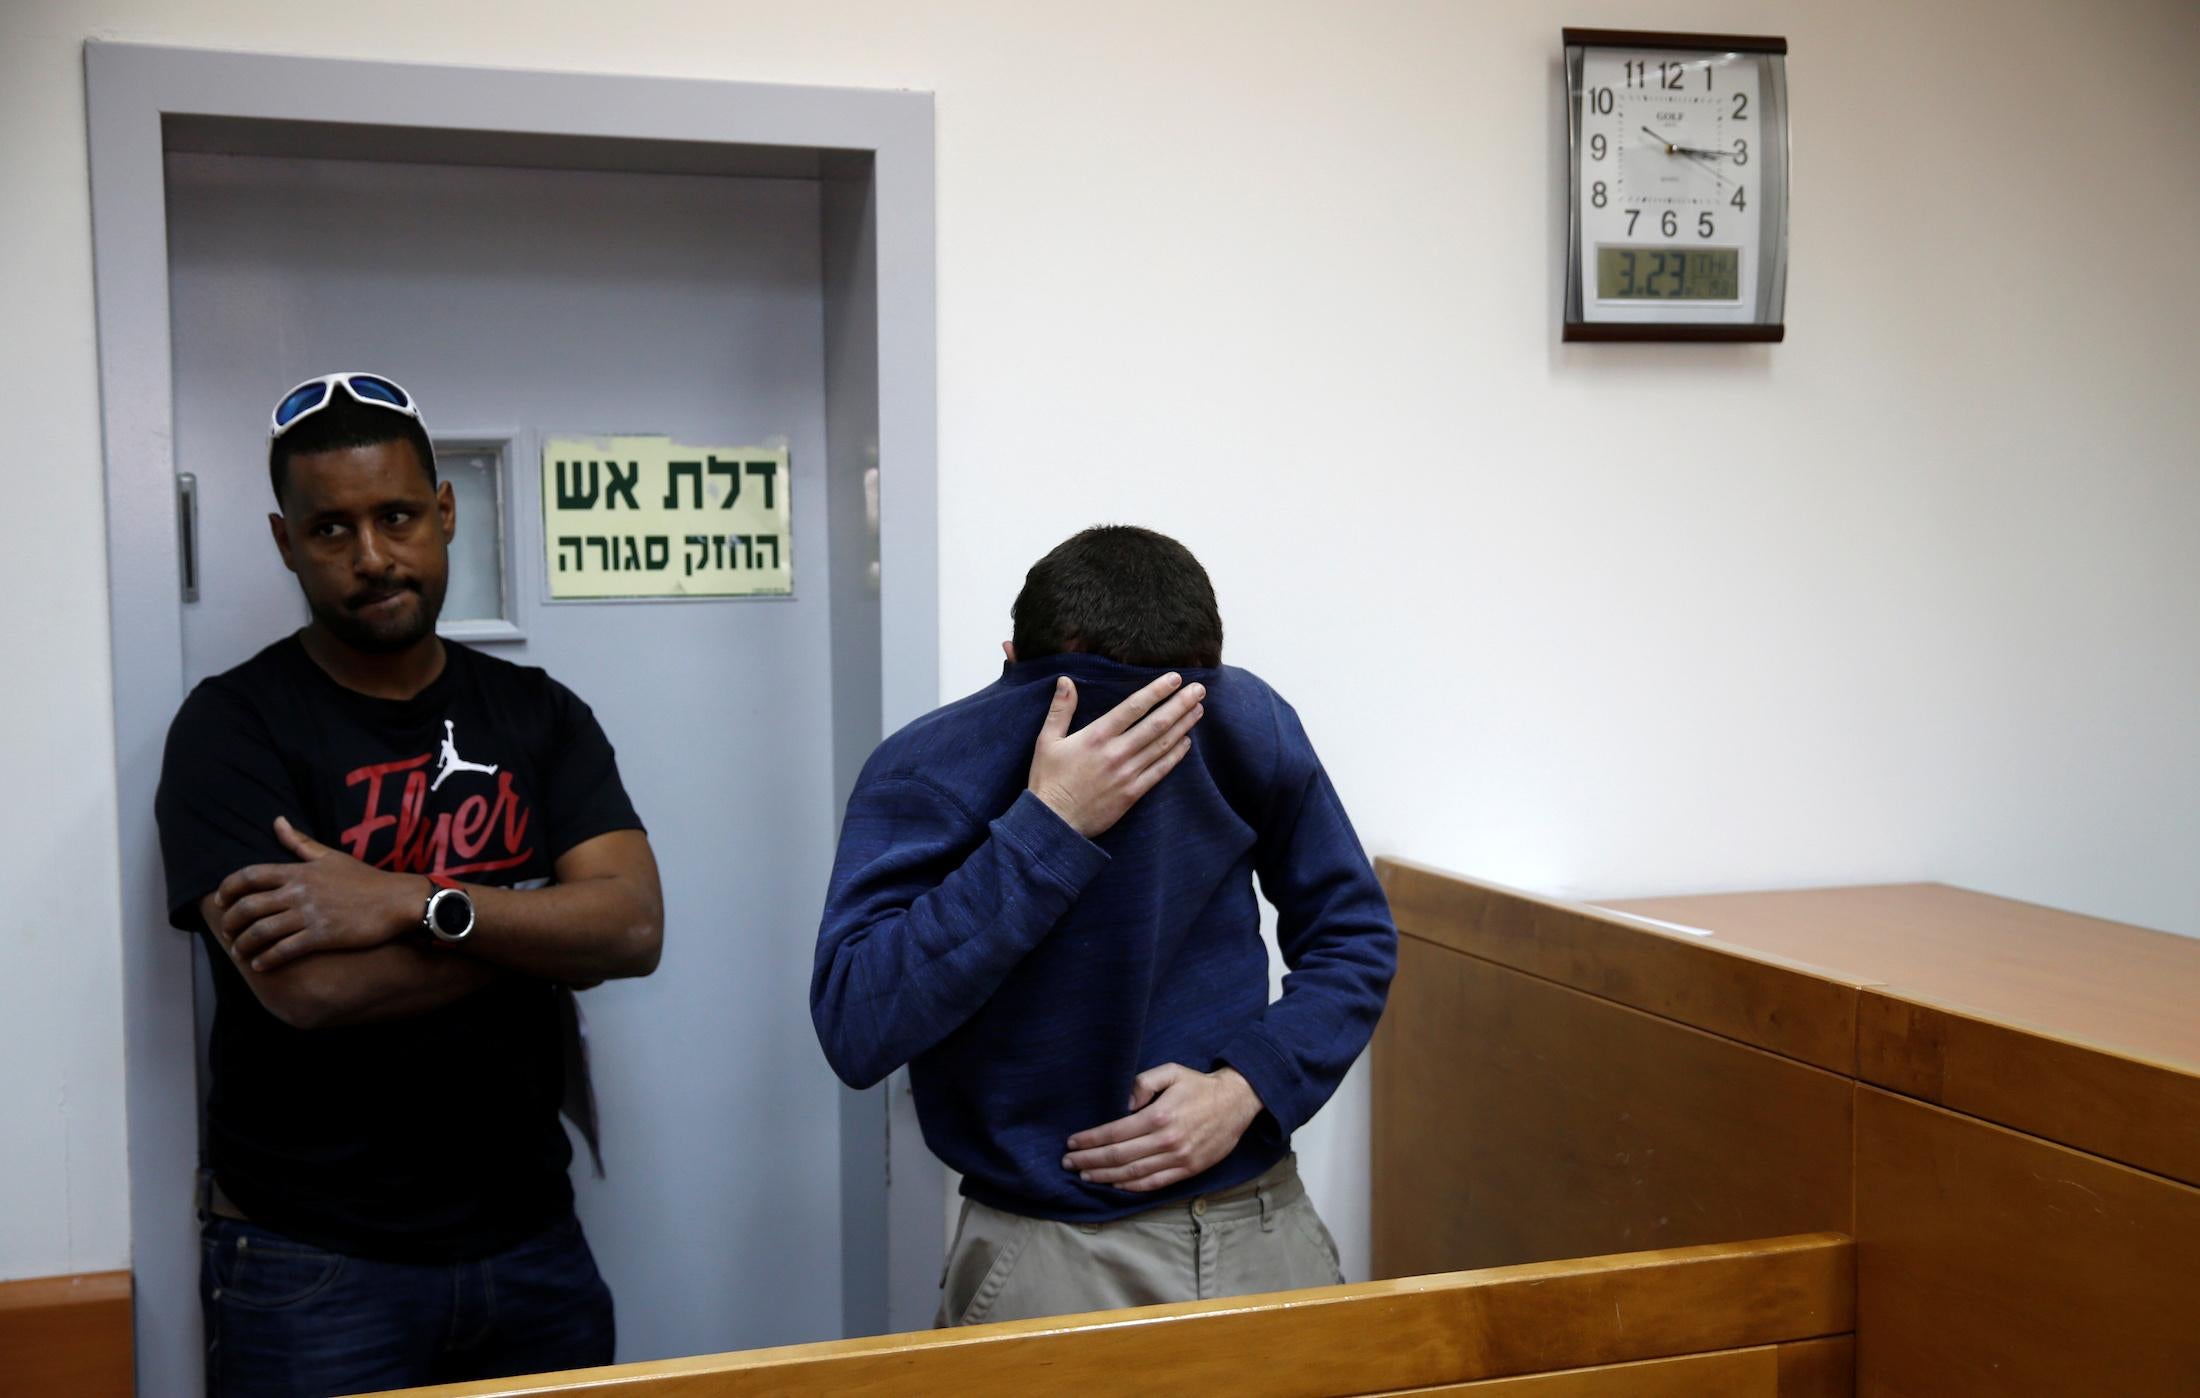 The teenager arrested on suspicion of making bomb threats against Jewish centres (right) attends a hearing in the Israeli city of Rishon LeZion on 23 March